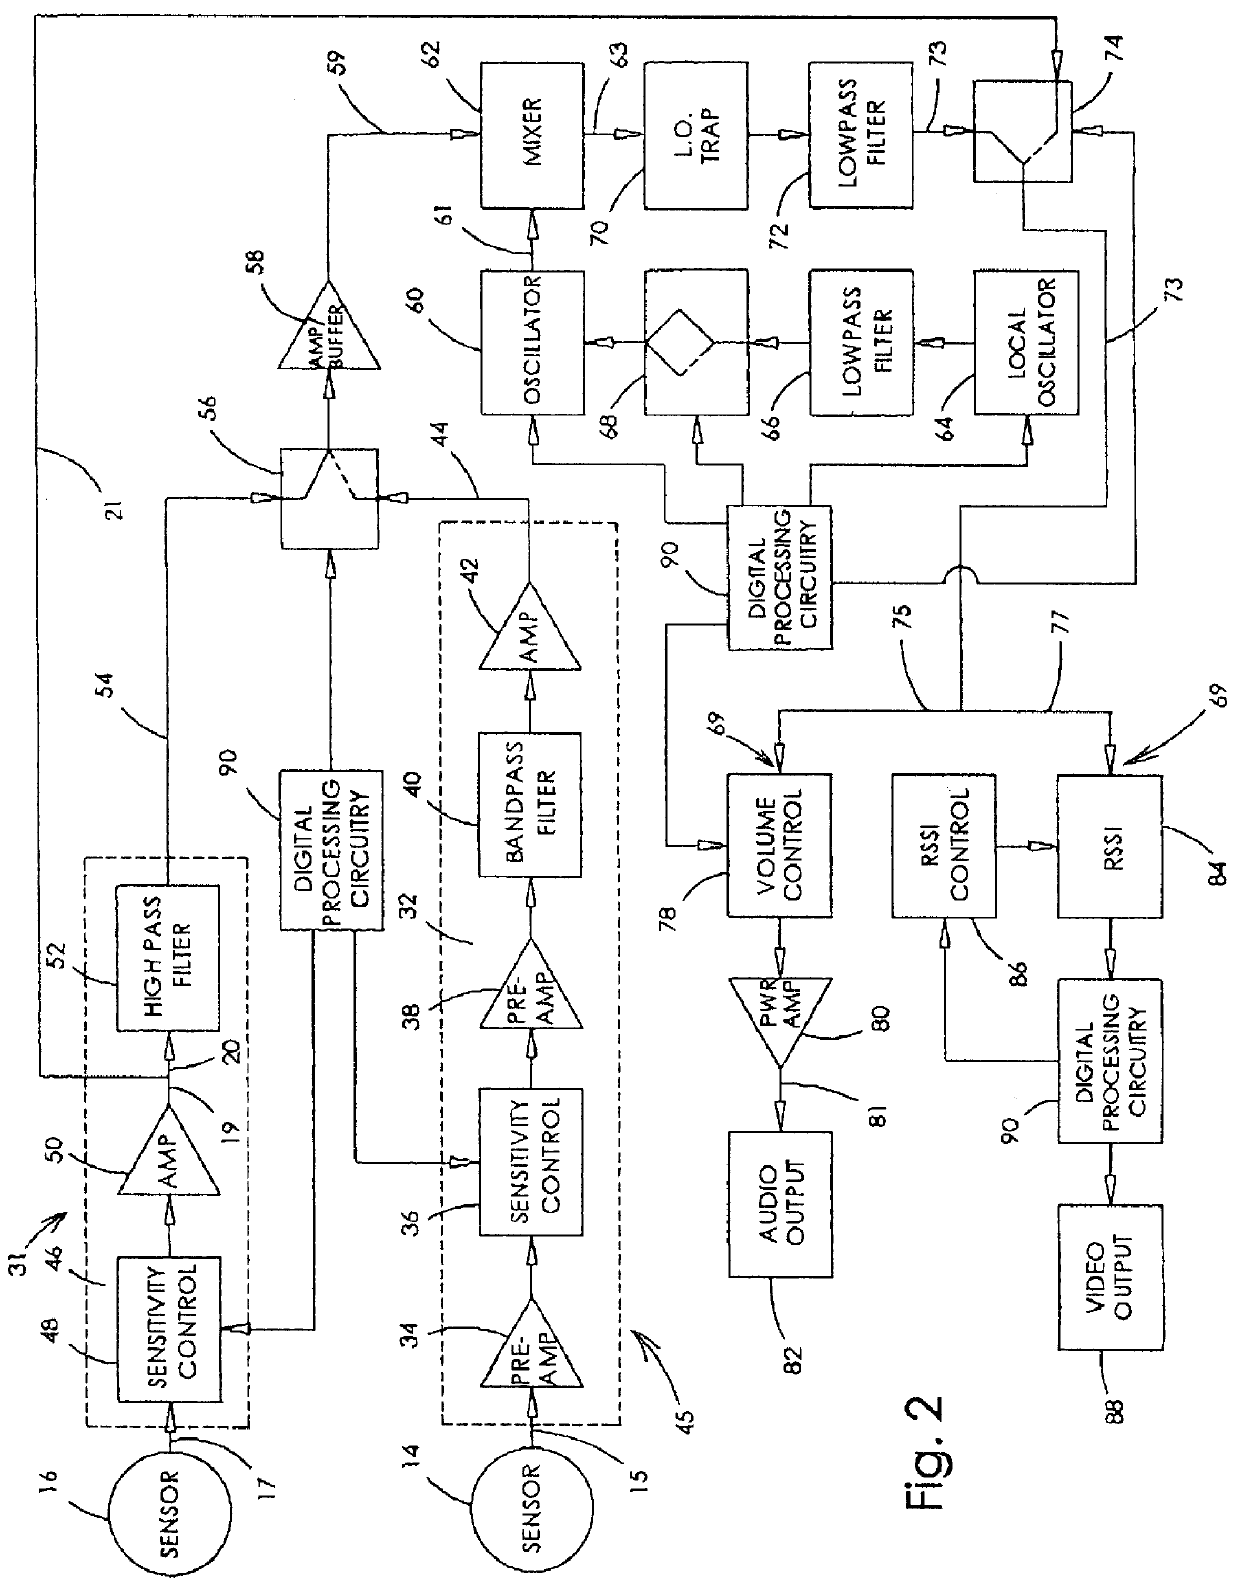 Signal detector and methodology for monitoring sound signals having frequencies over a selected frequency range